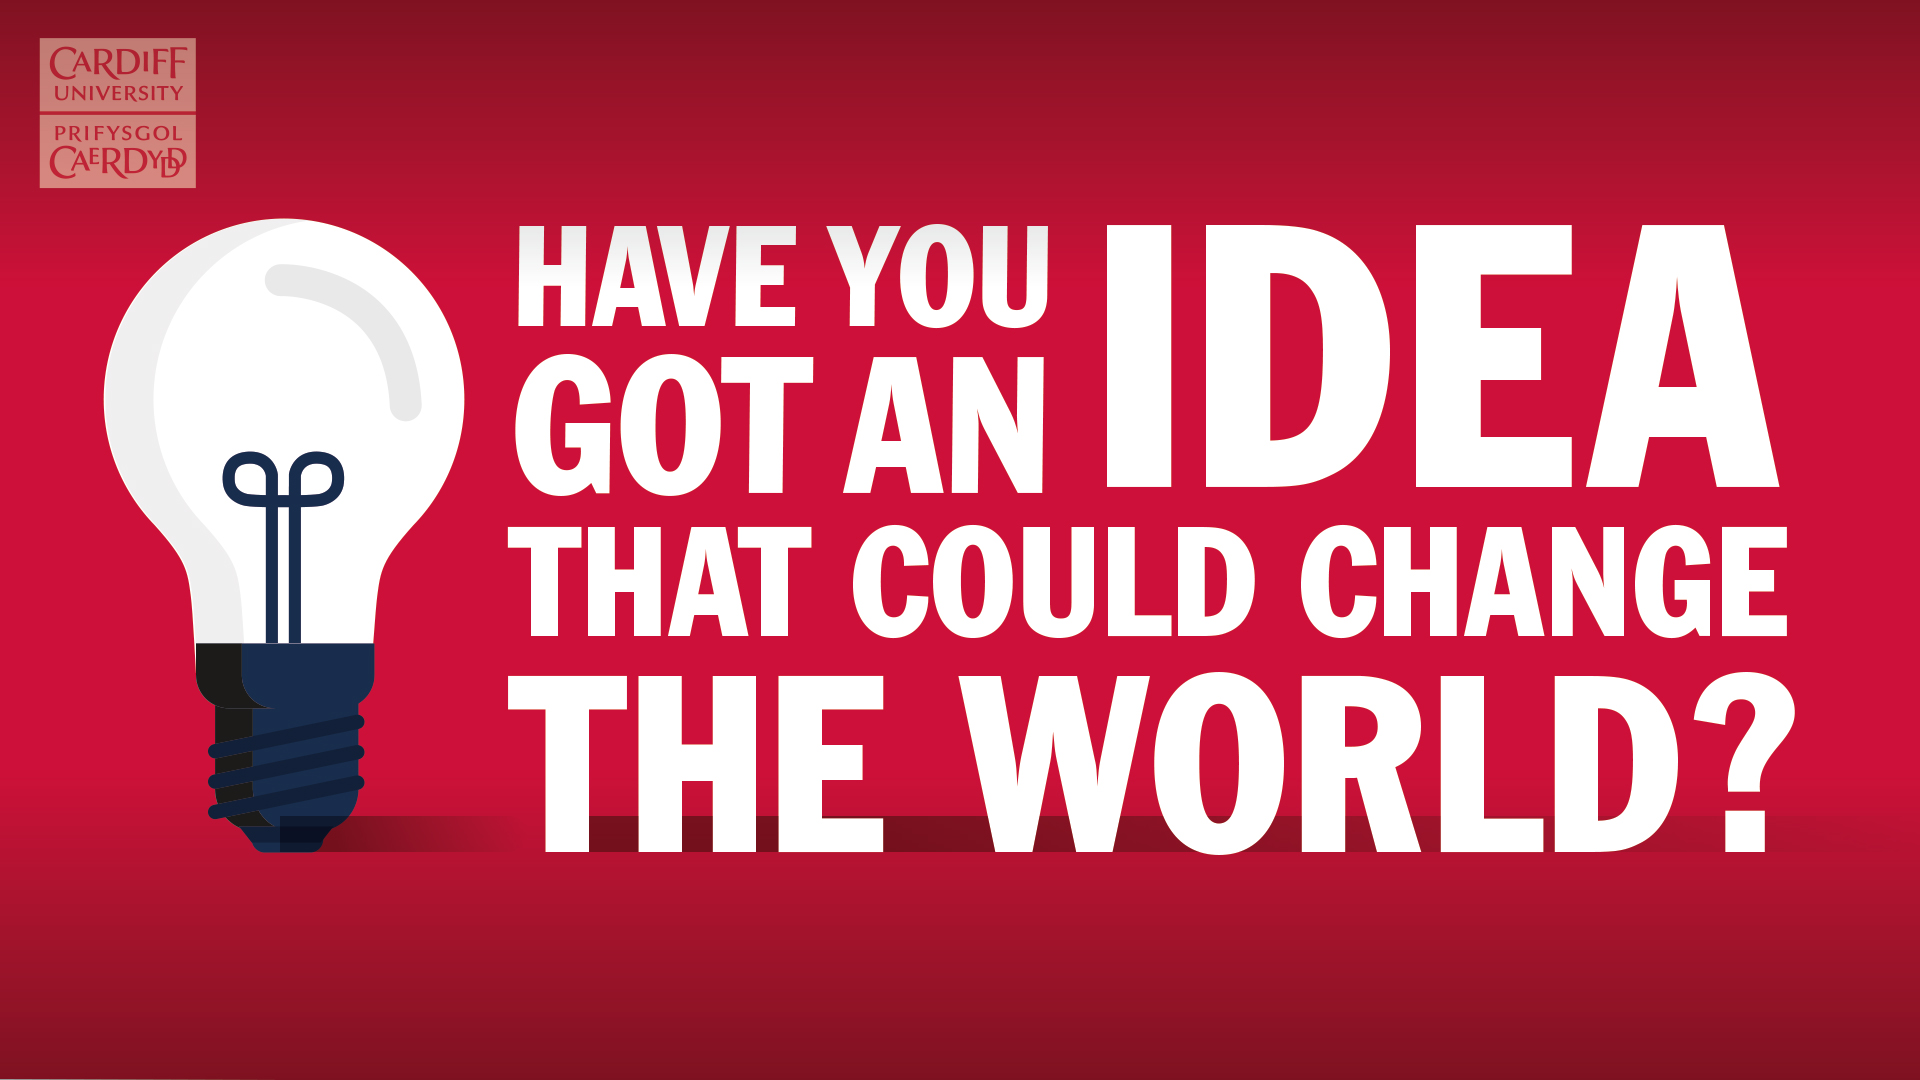 Have you got an idea that could change the world?